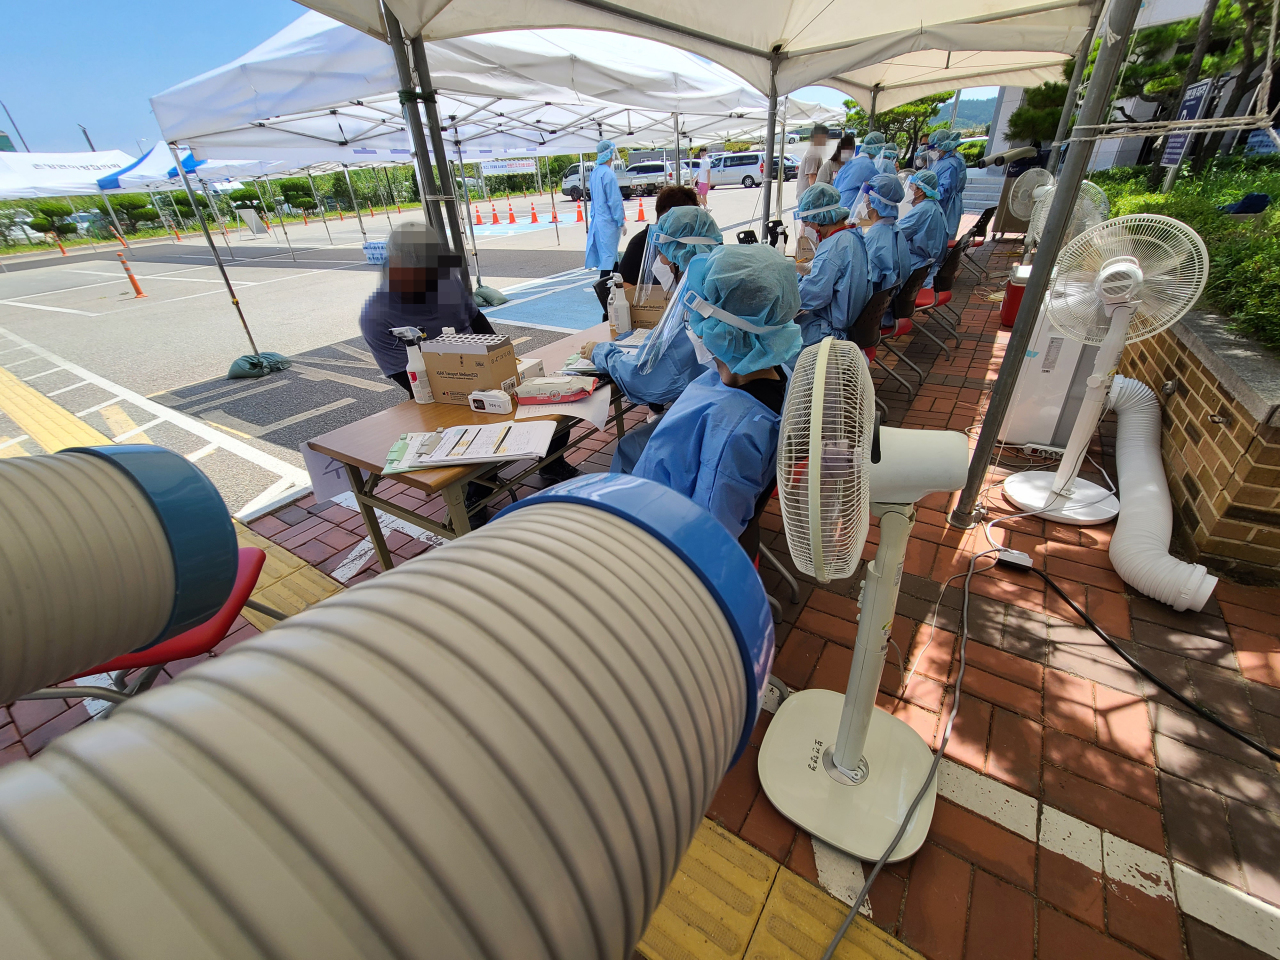 Medical workers administer COVID-19 tests to visitors at a screening facility in Gangwon Province on Sunday. (Yonhap)